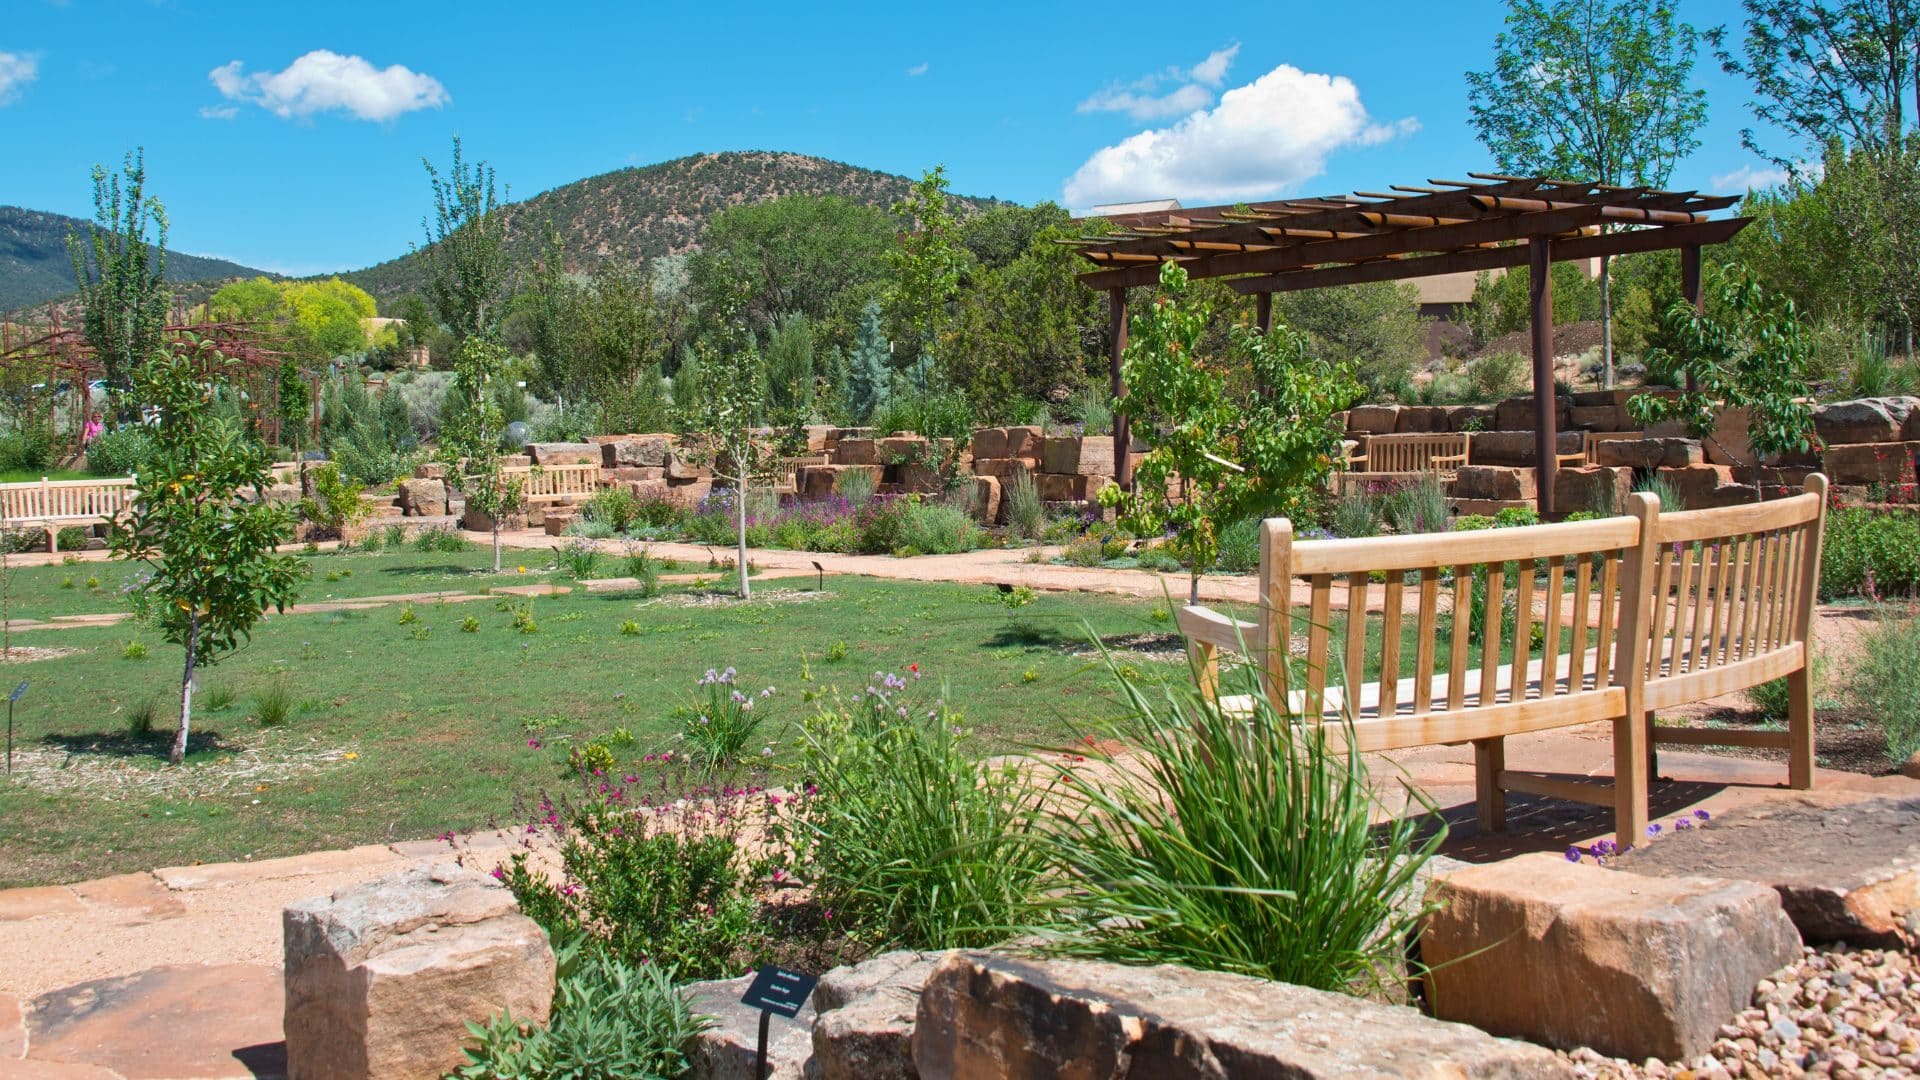 Section of Santa Fe Botanical Garden with green grass, dirt paths, a bench and hills in the distance.